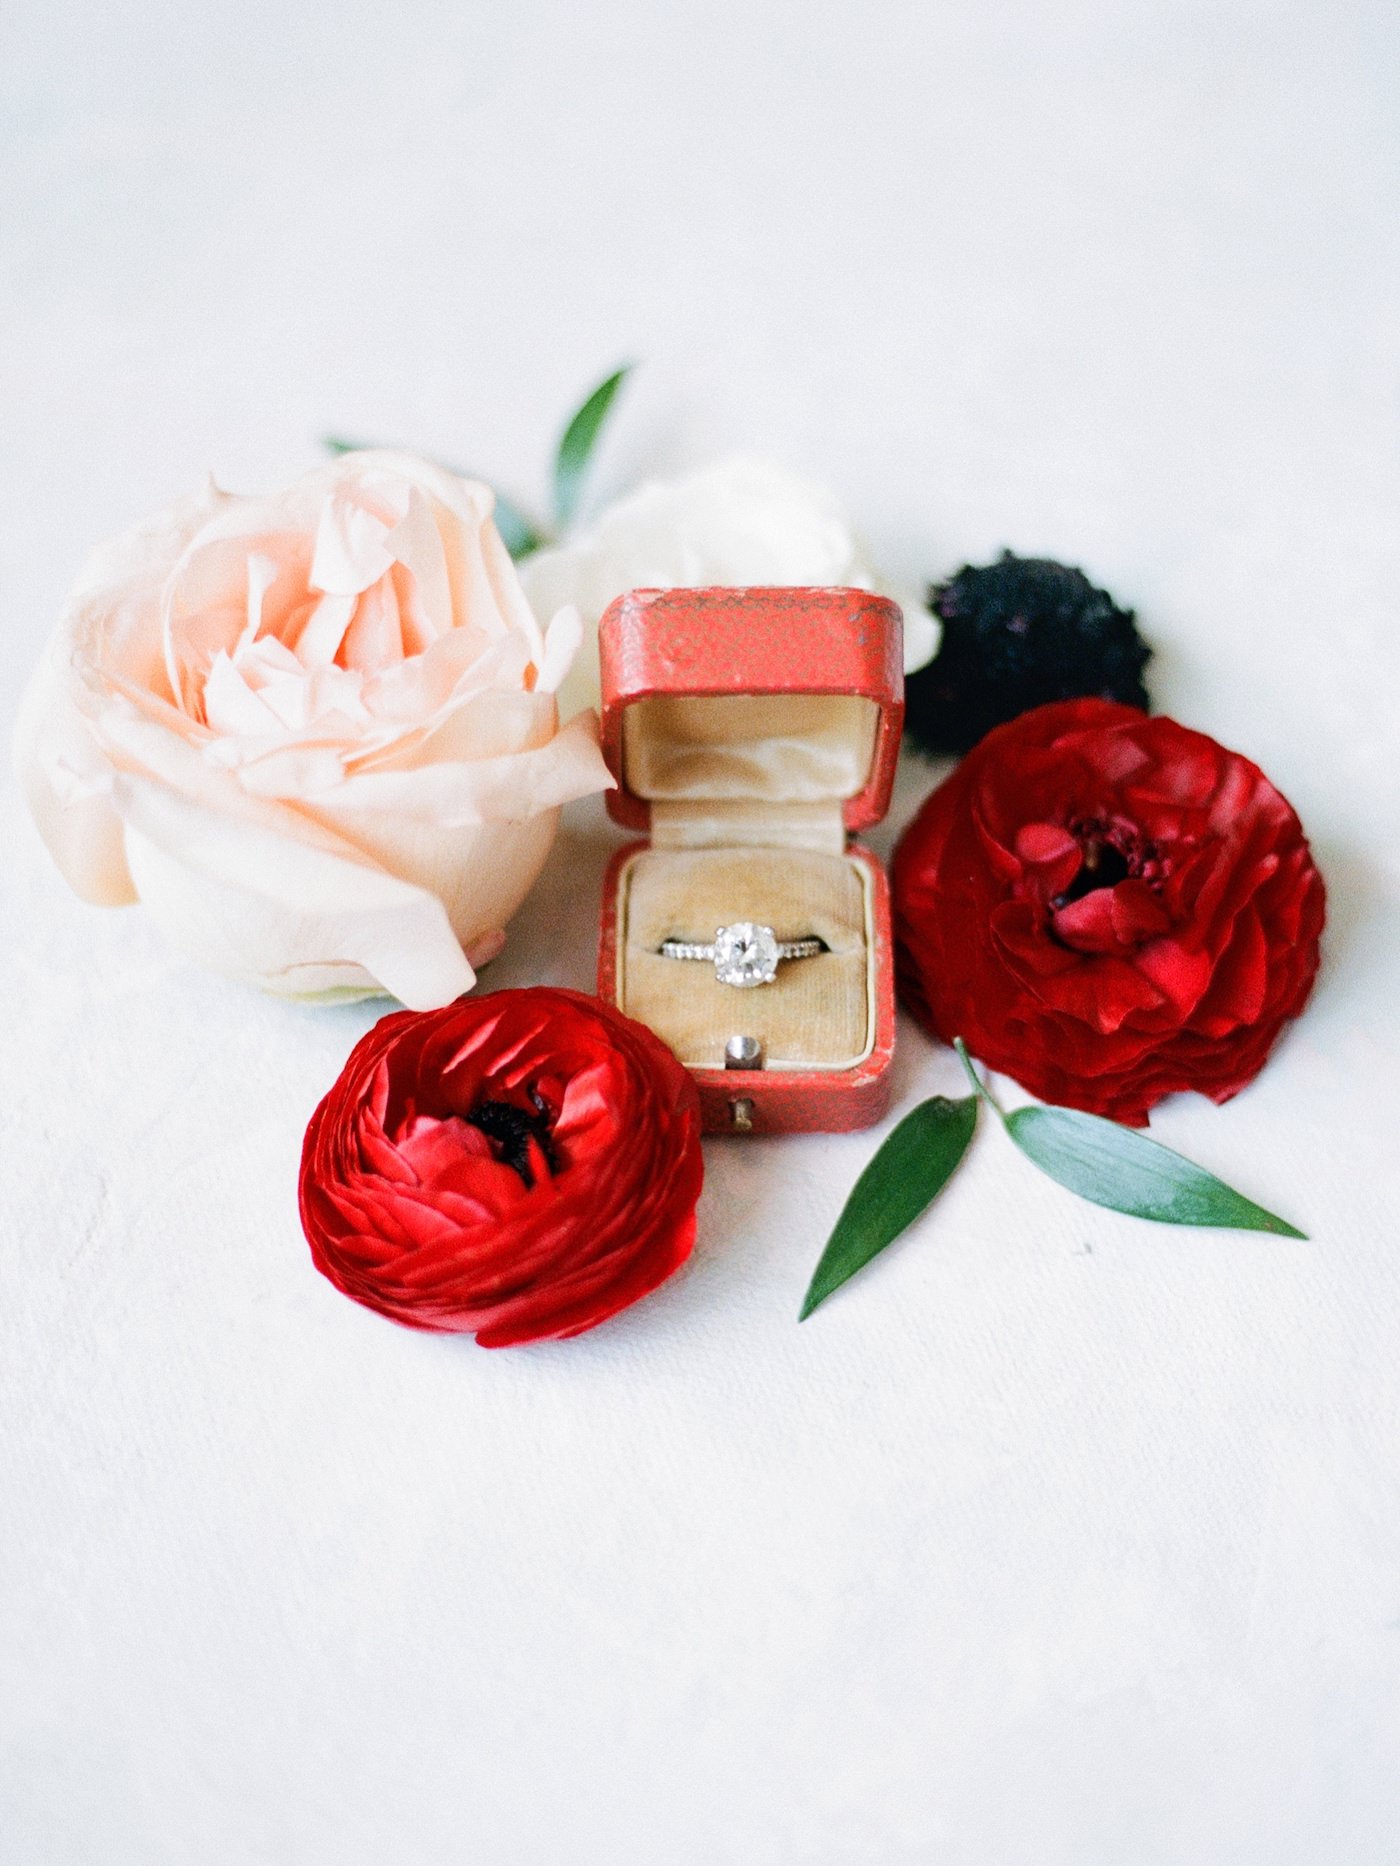 Fall Autumn Wedding Ring Box Shot with Red Ranunculus and Cream Rose | Red Cartier Engagement Ring Box with Round Solitaire Diamond and Channel Set Band | Brides N Blooms